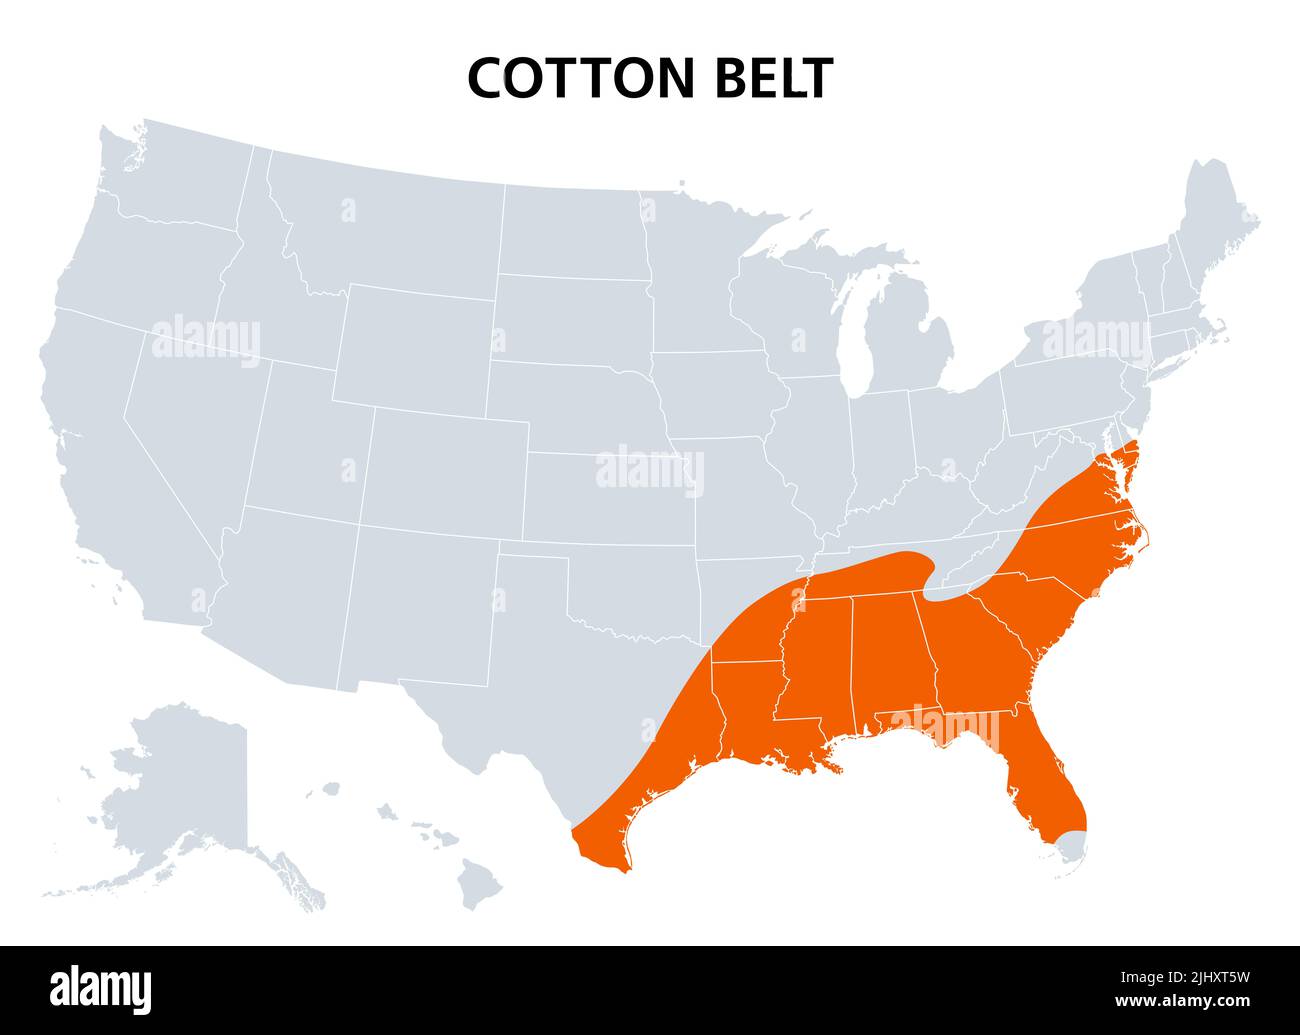 Cotton Belt of the United States, political map. Region of the American South, from Delaware to East Texas, where cotton was the predominant cash crop. Stock Photo